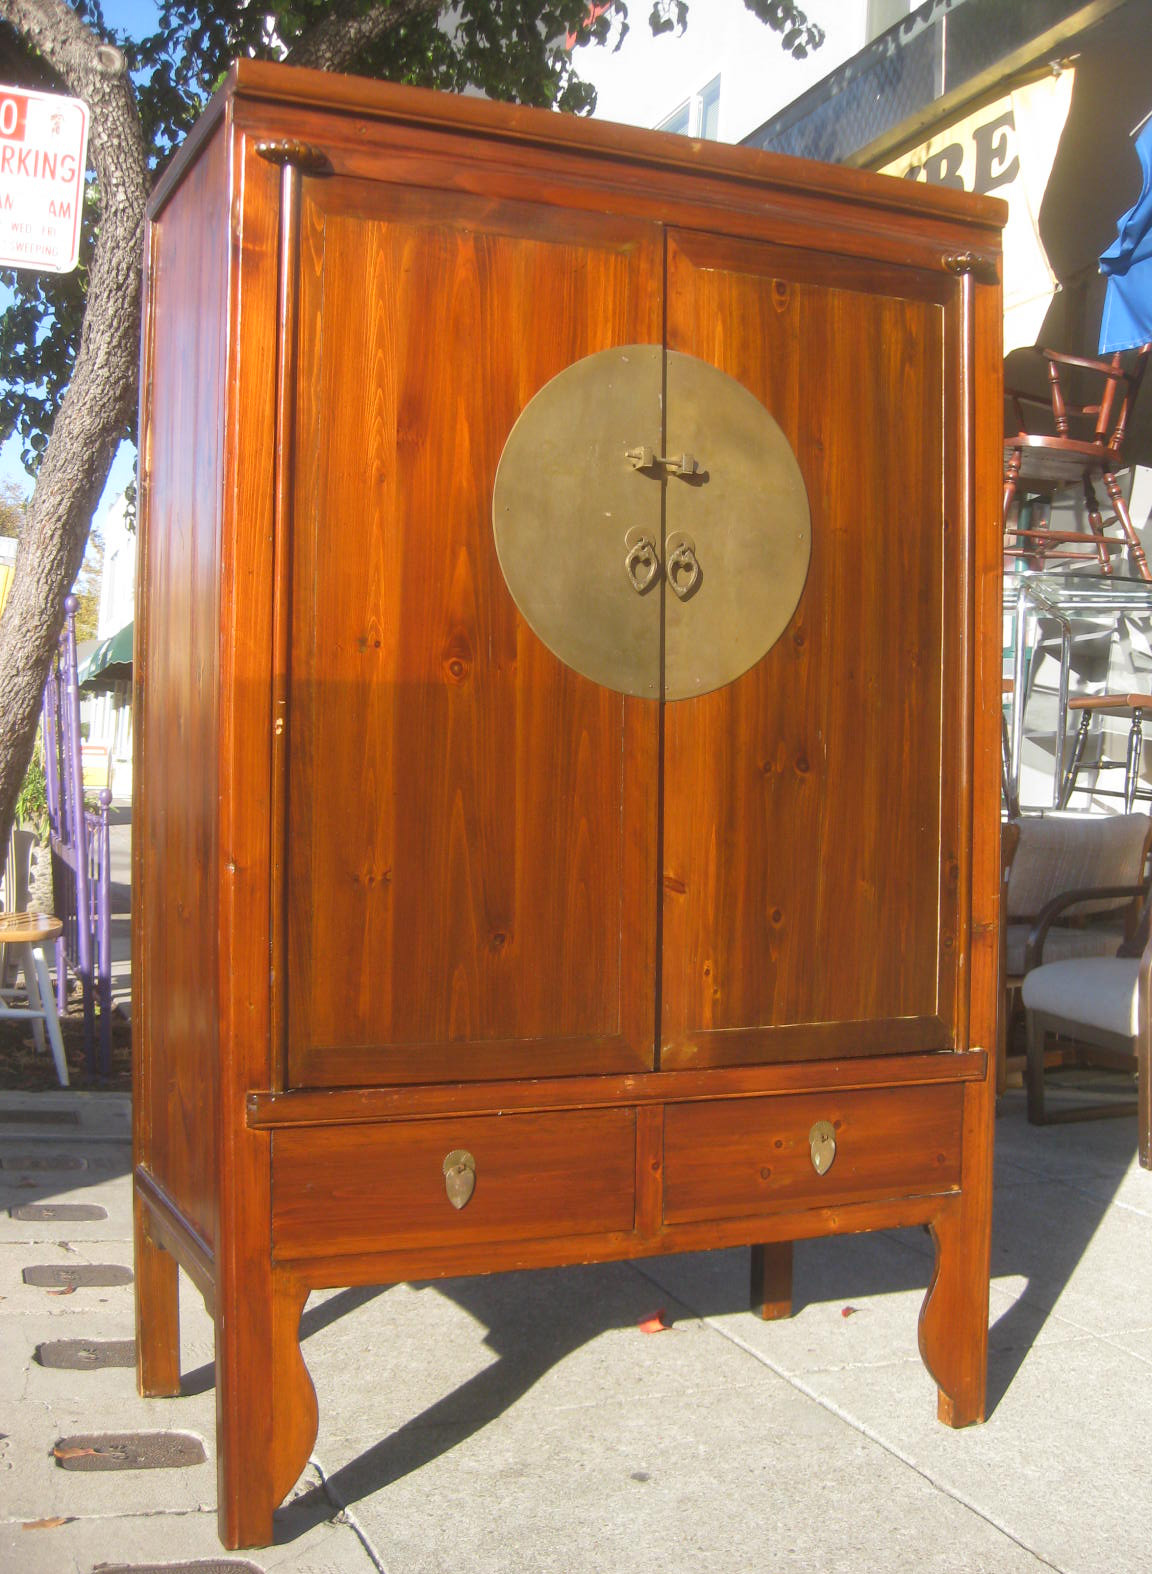 UHURU FURNITURE &amp; COLLECTIBLES: SOLD - Chinese Rustic Armoire - $180